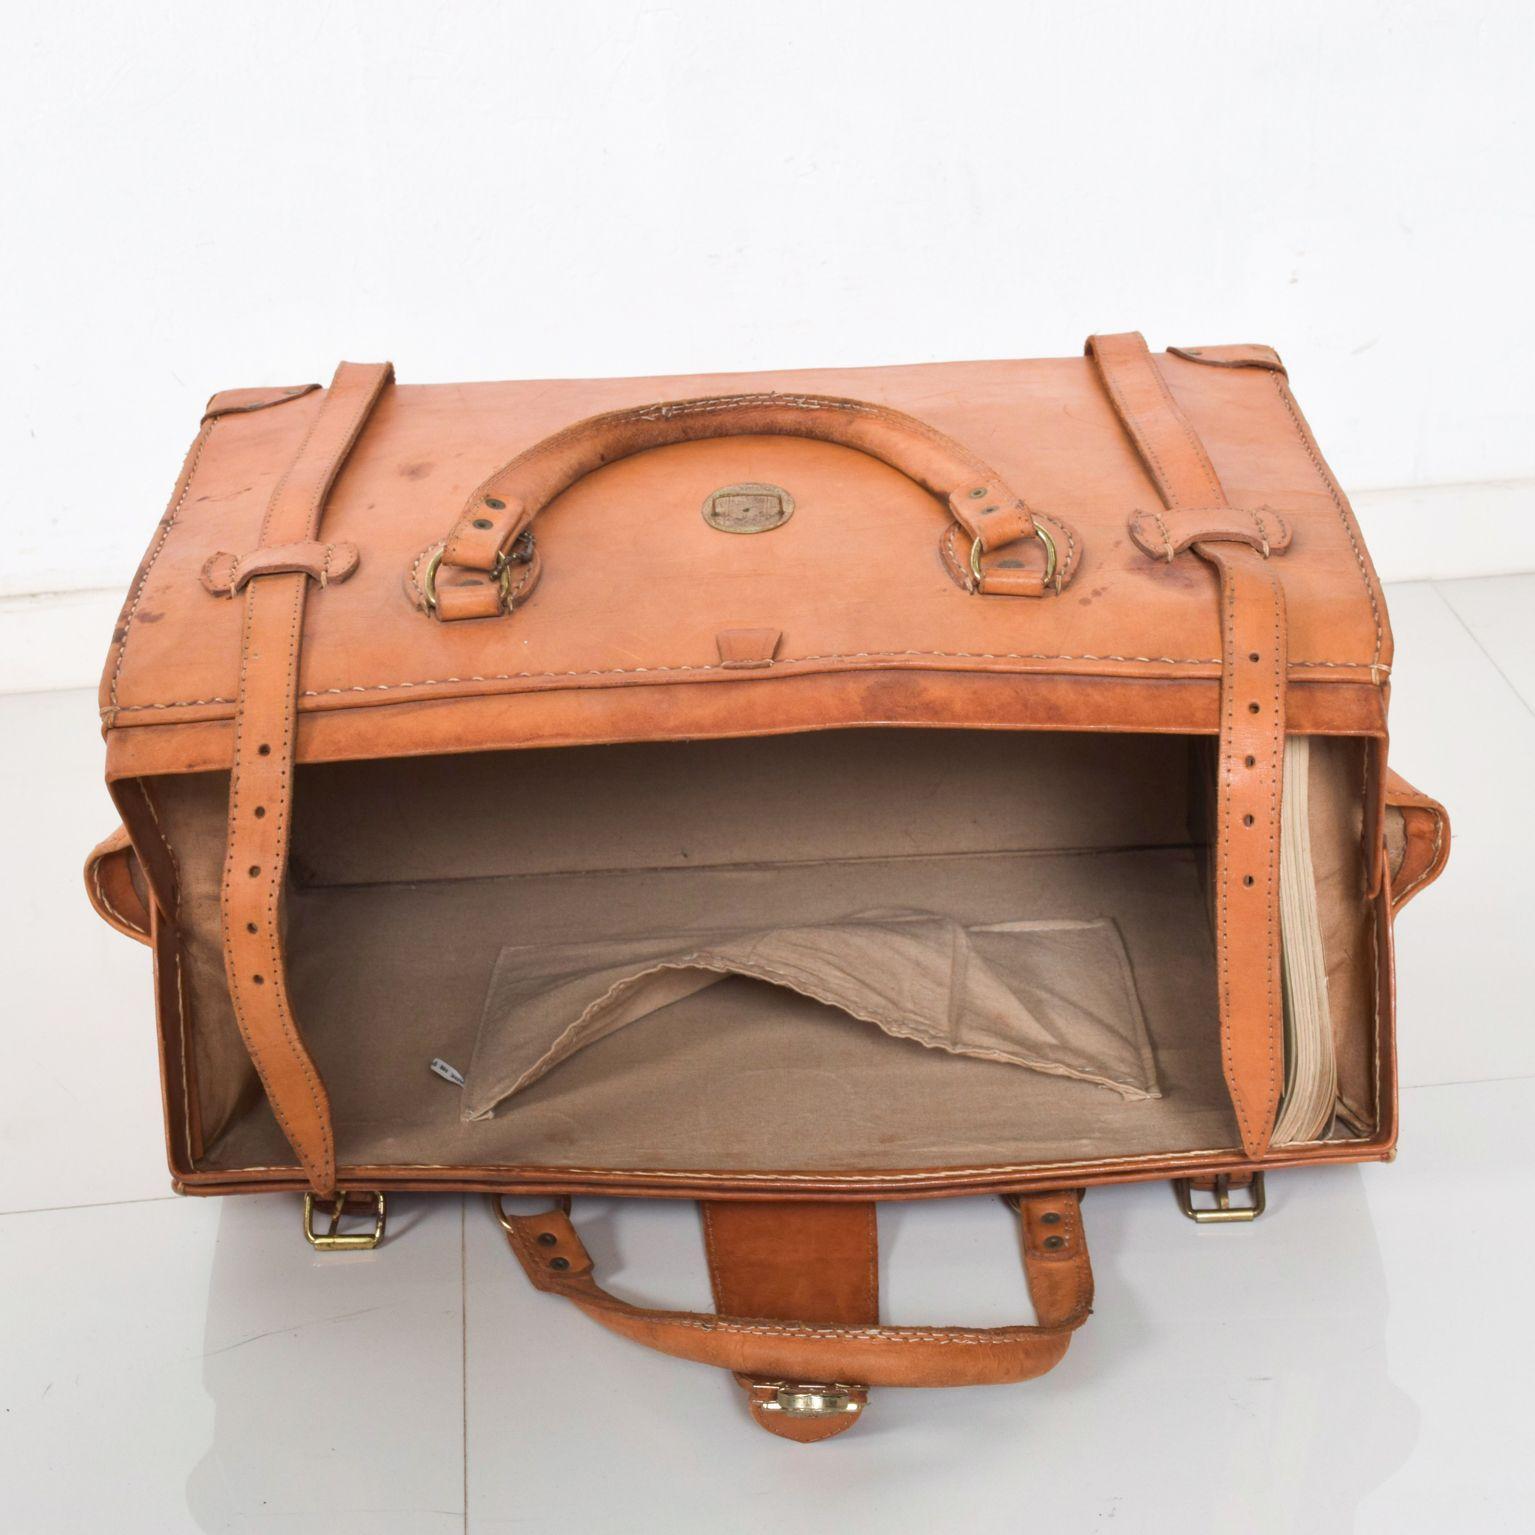 Modern Vintage Distressed Leather Saddle Carry Travel Tote Doctor's Bag Paraguay